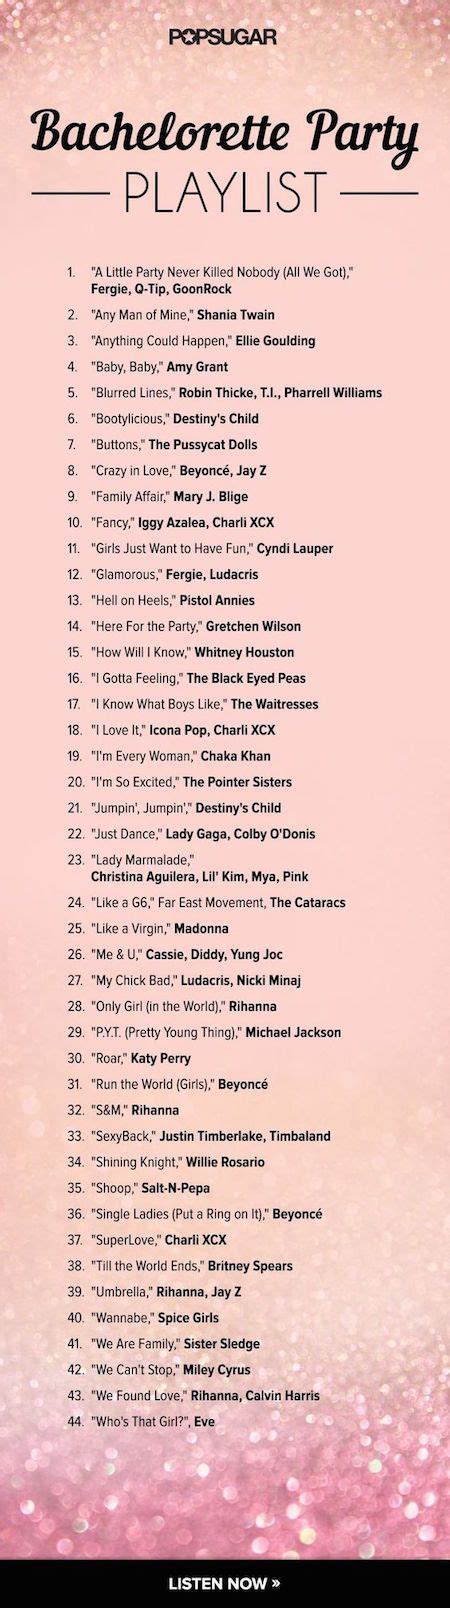 6 Out Of The Box Bachelorette Party Ideas Bachelorette Party Songs